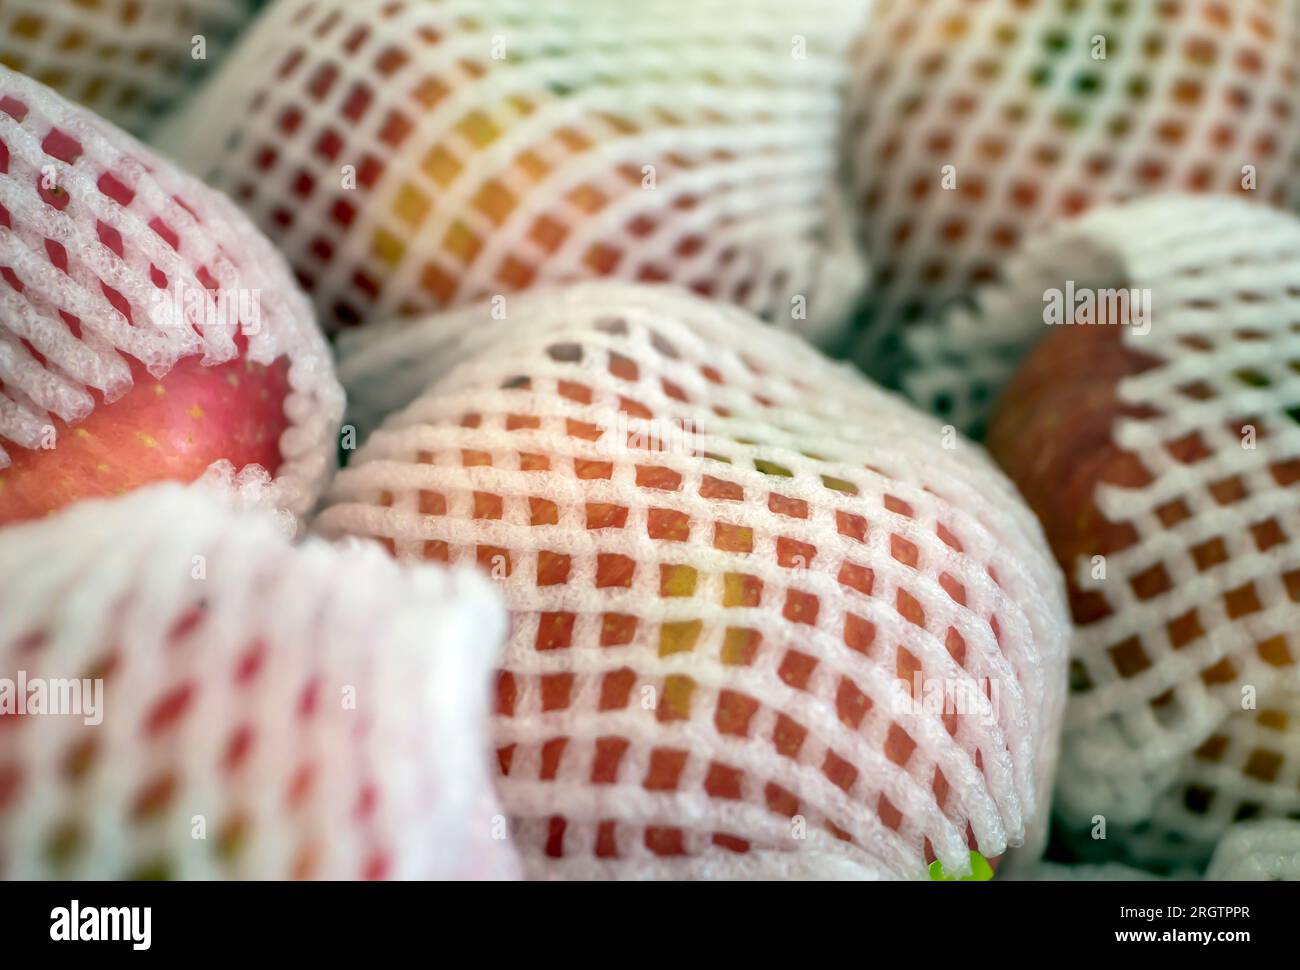 Apples wrapped with styrofoam, not an environmentally friendly packaging material. Stock Photo